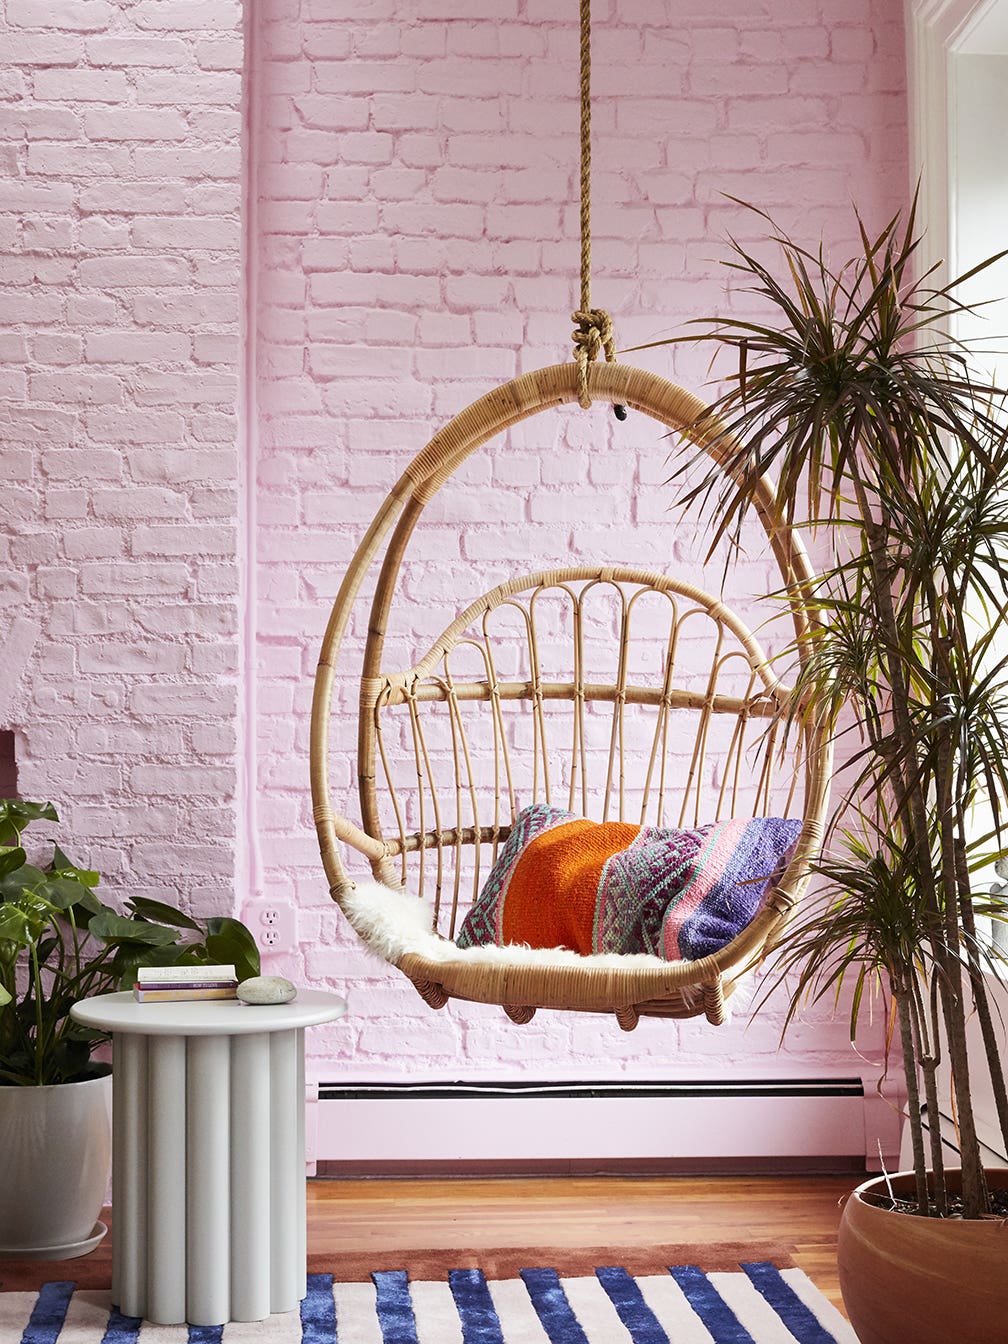 Five Years Later, This Anthro Swing Chair Still Gives Me Childhood Summer Vibes Year-Round